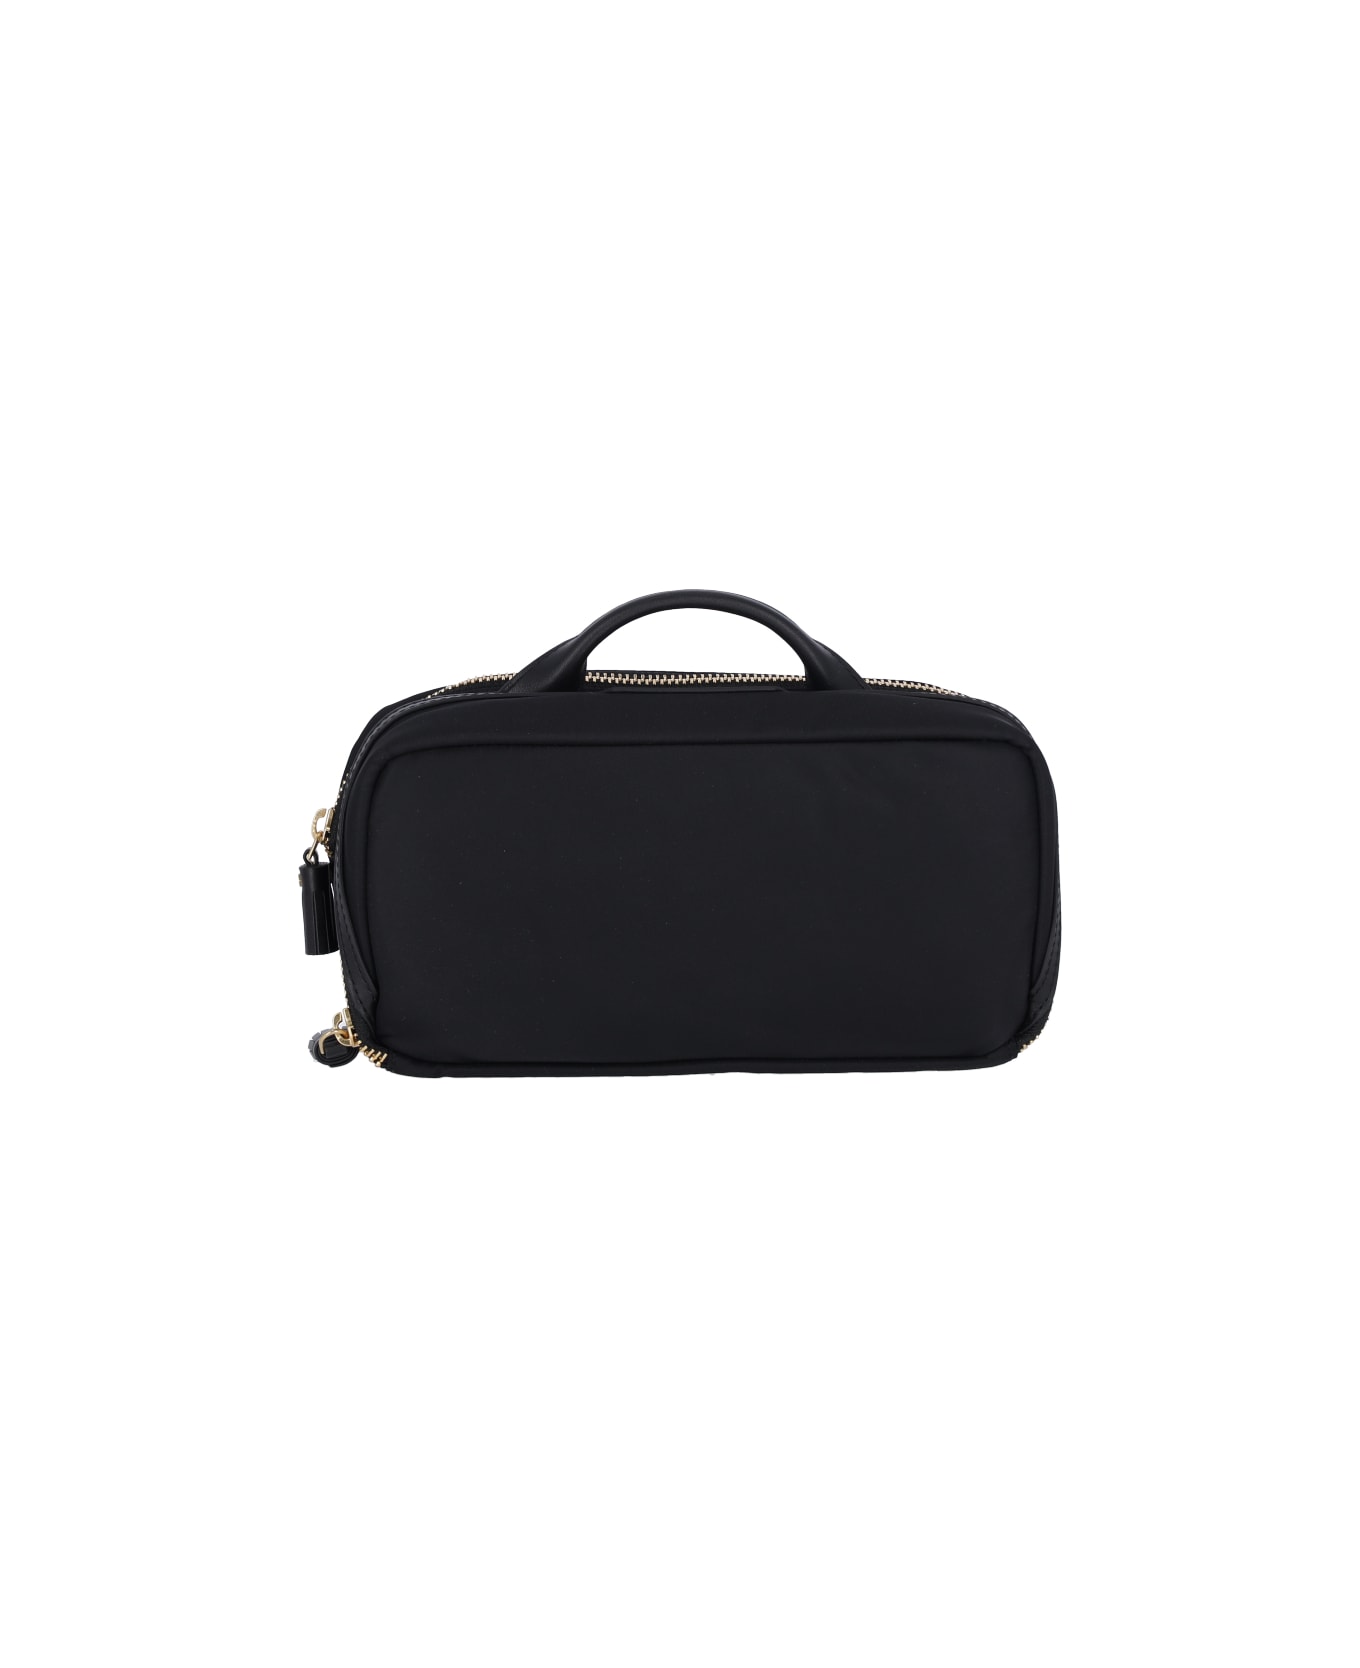 Anya Hindmarch 'home Office' Pouch - Black  